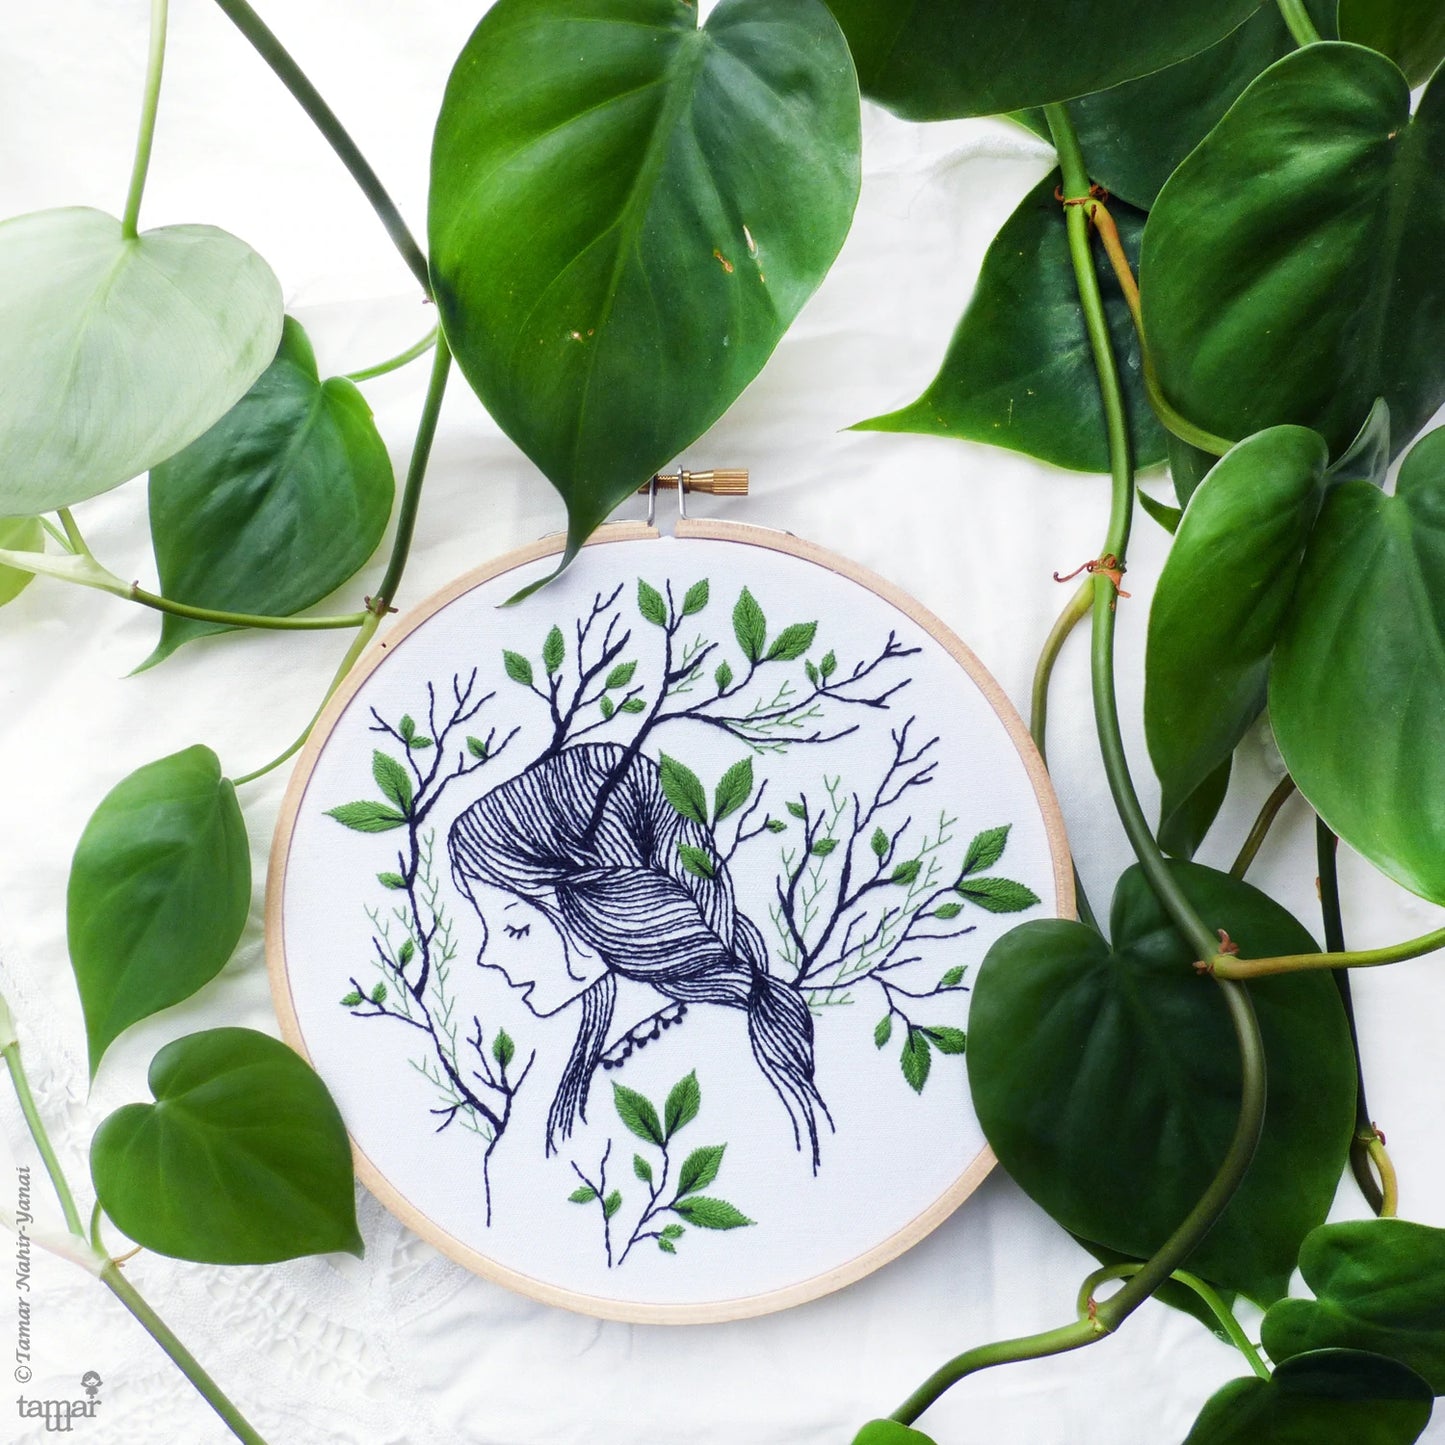 Forest Girl embroidery kit